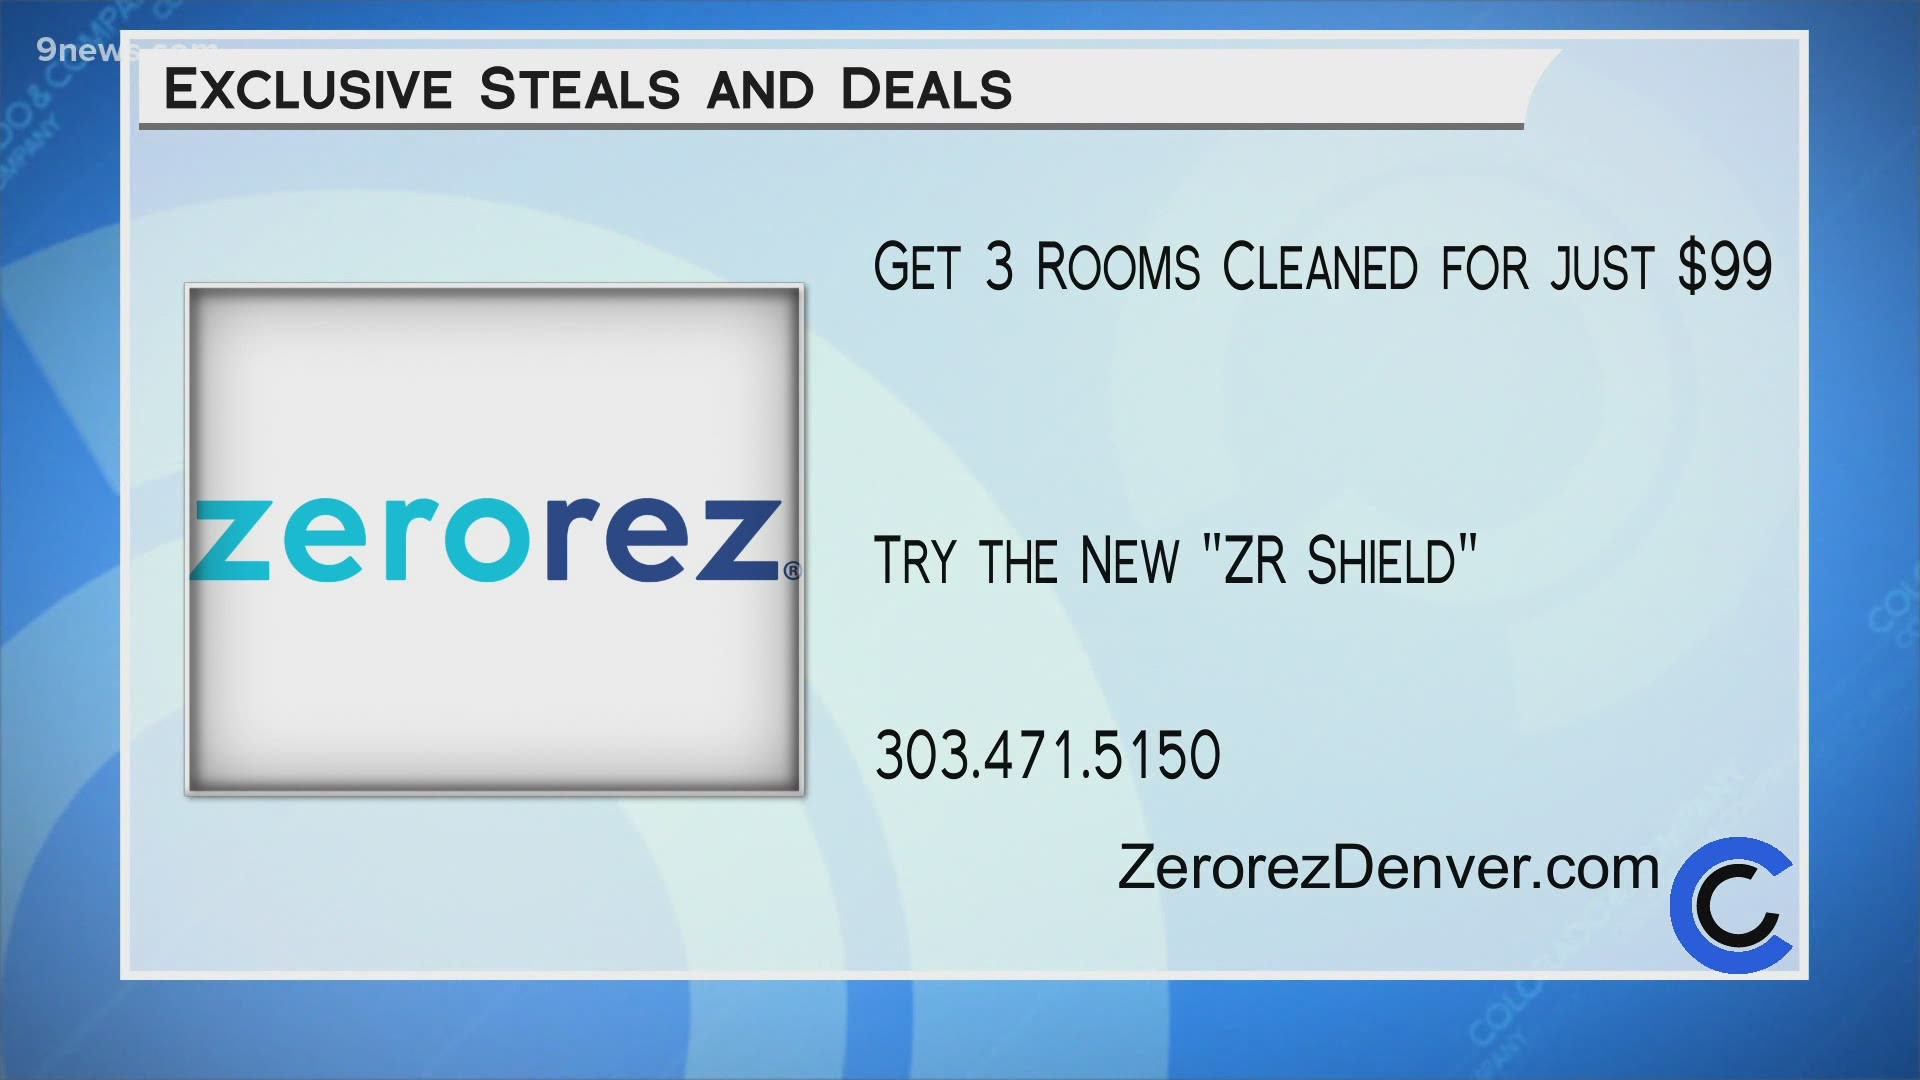 Protect your carpets and keep allergies out with Zerorez! Get 3 rooms cleaned for just $99. Call 303.471.5150 or visit ZerorezDenver.com to get started.